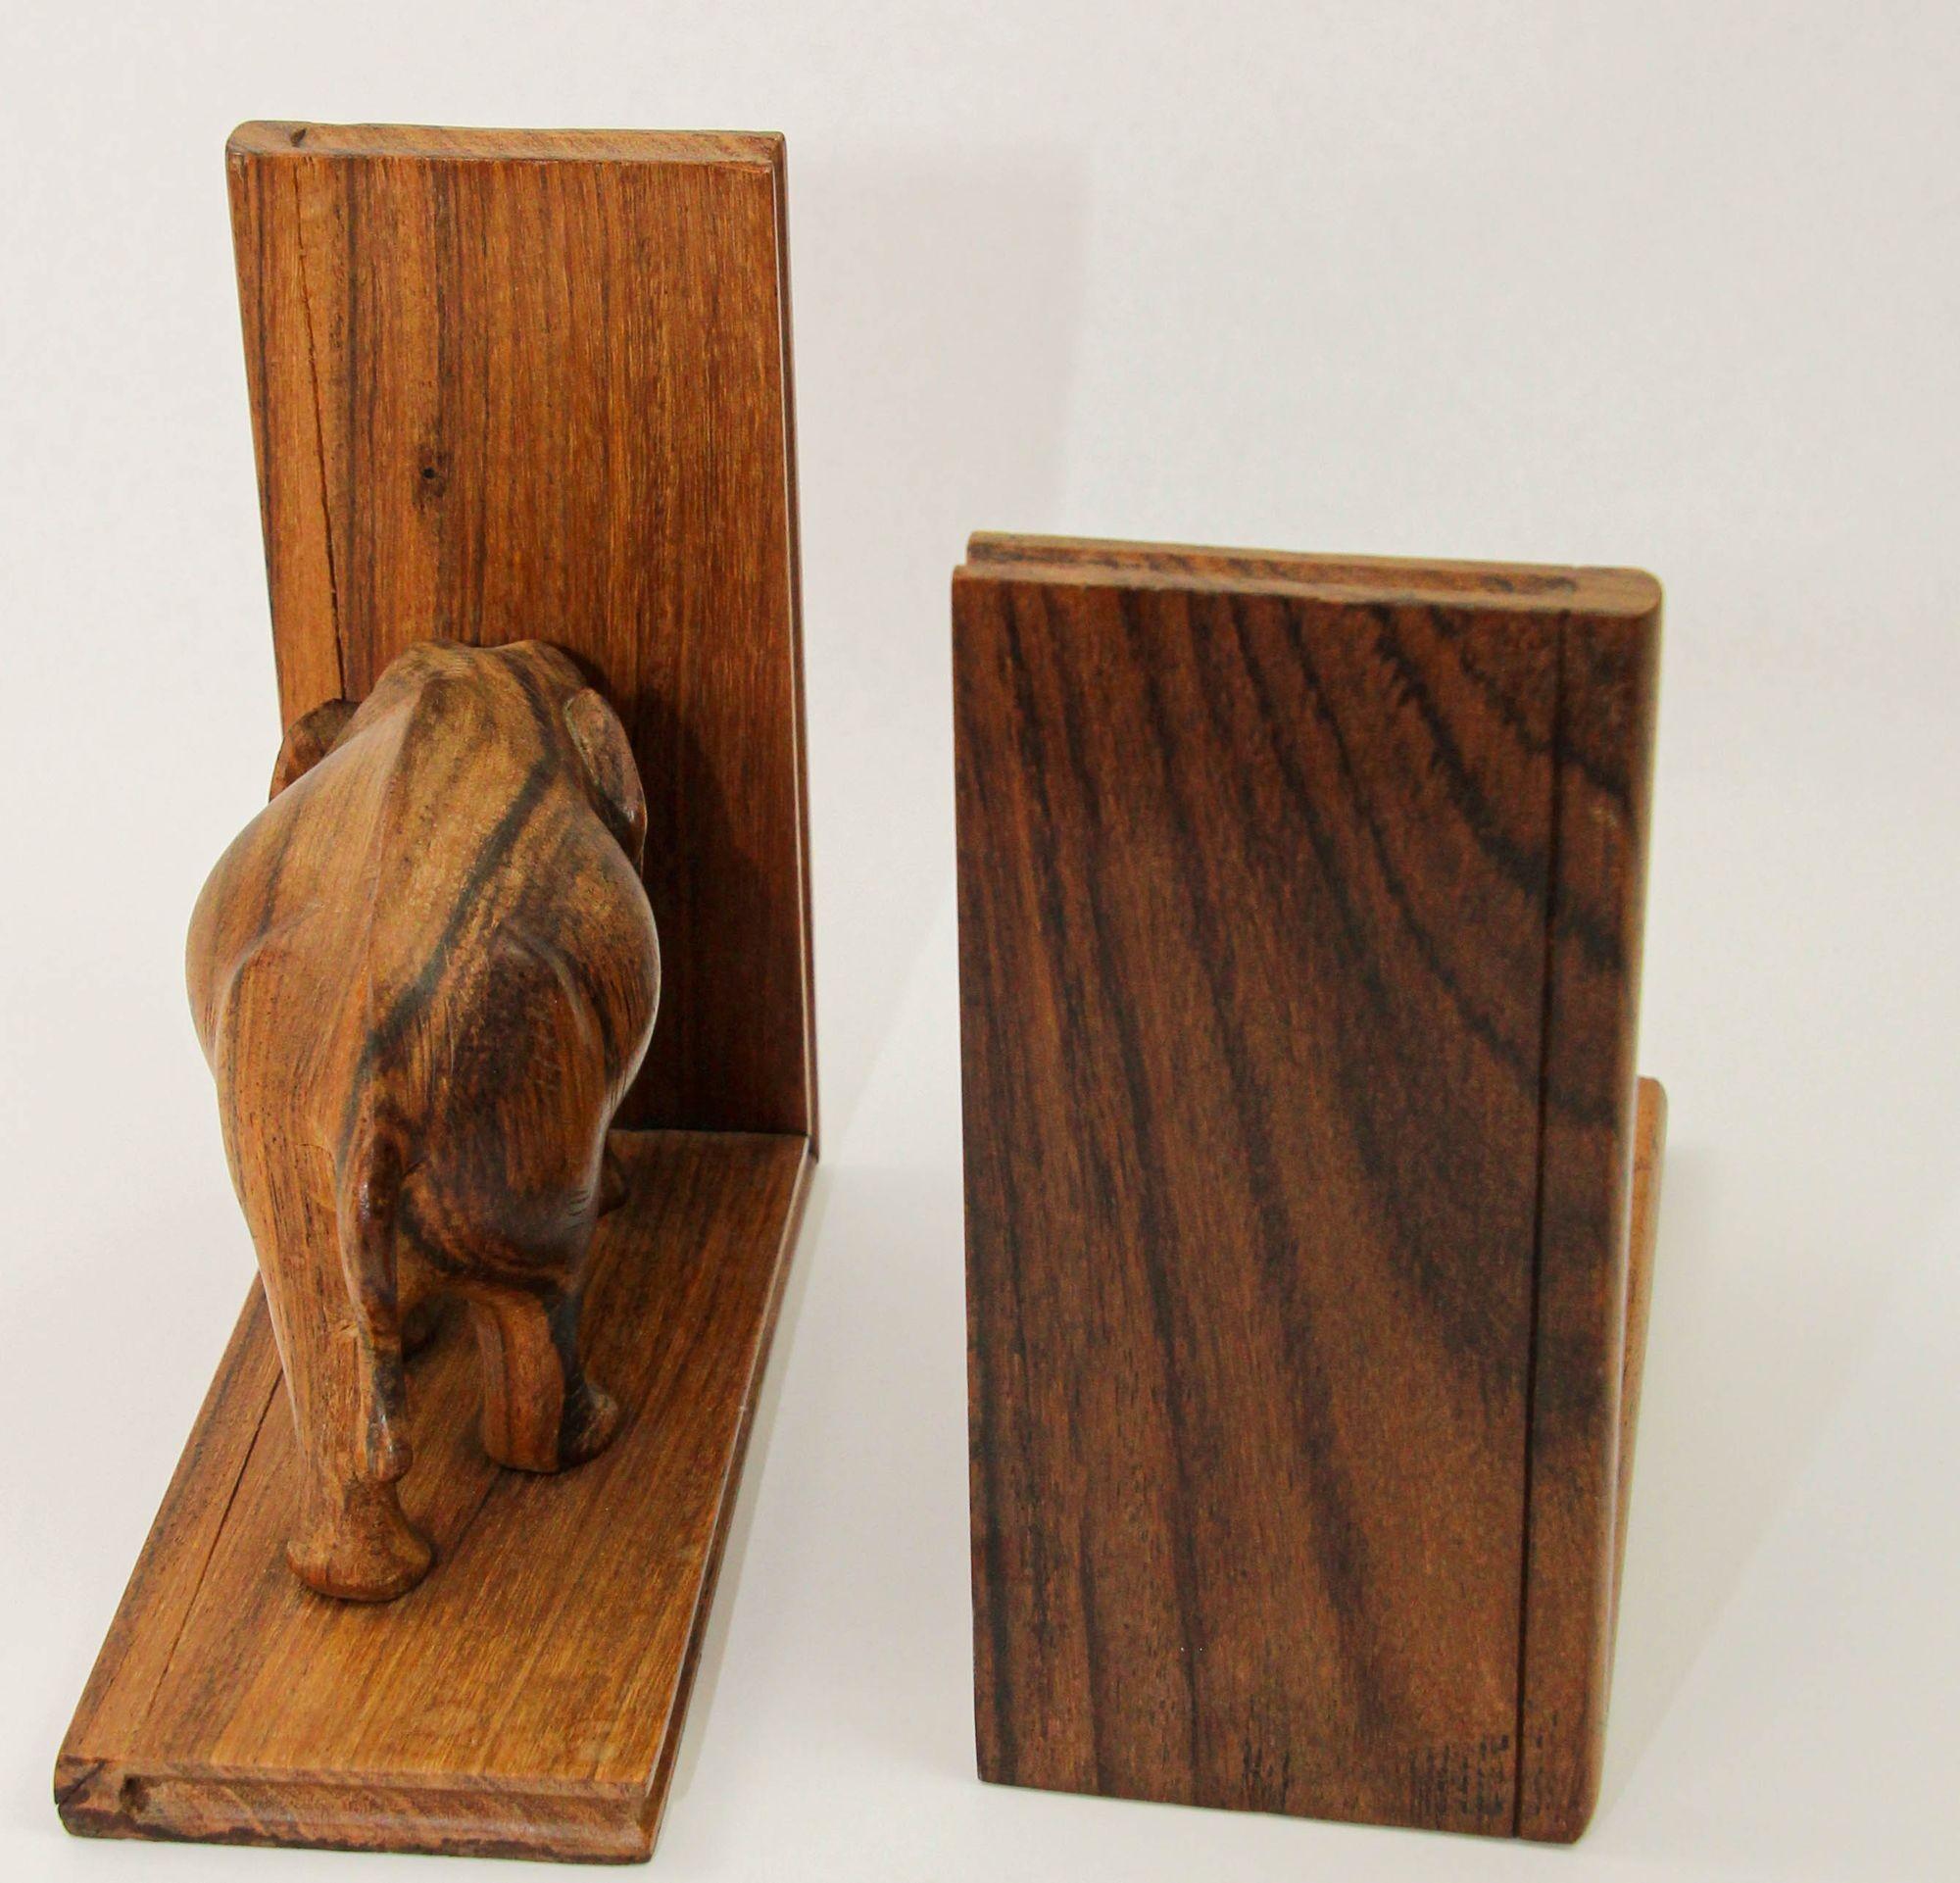 20th Century Art Deco Wooden Asian Elephant Bookends Hand Carved Rosewood India 1940s For Sale